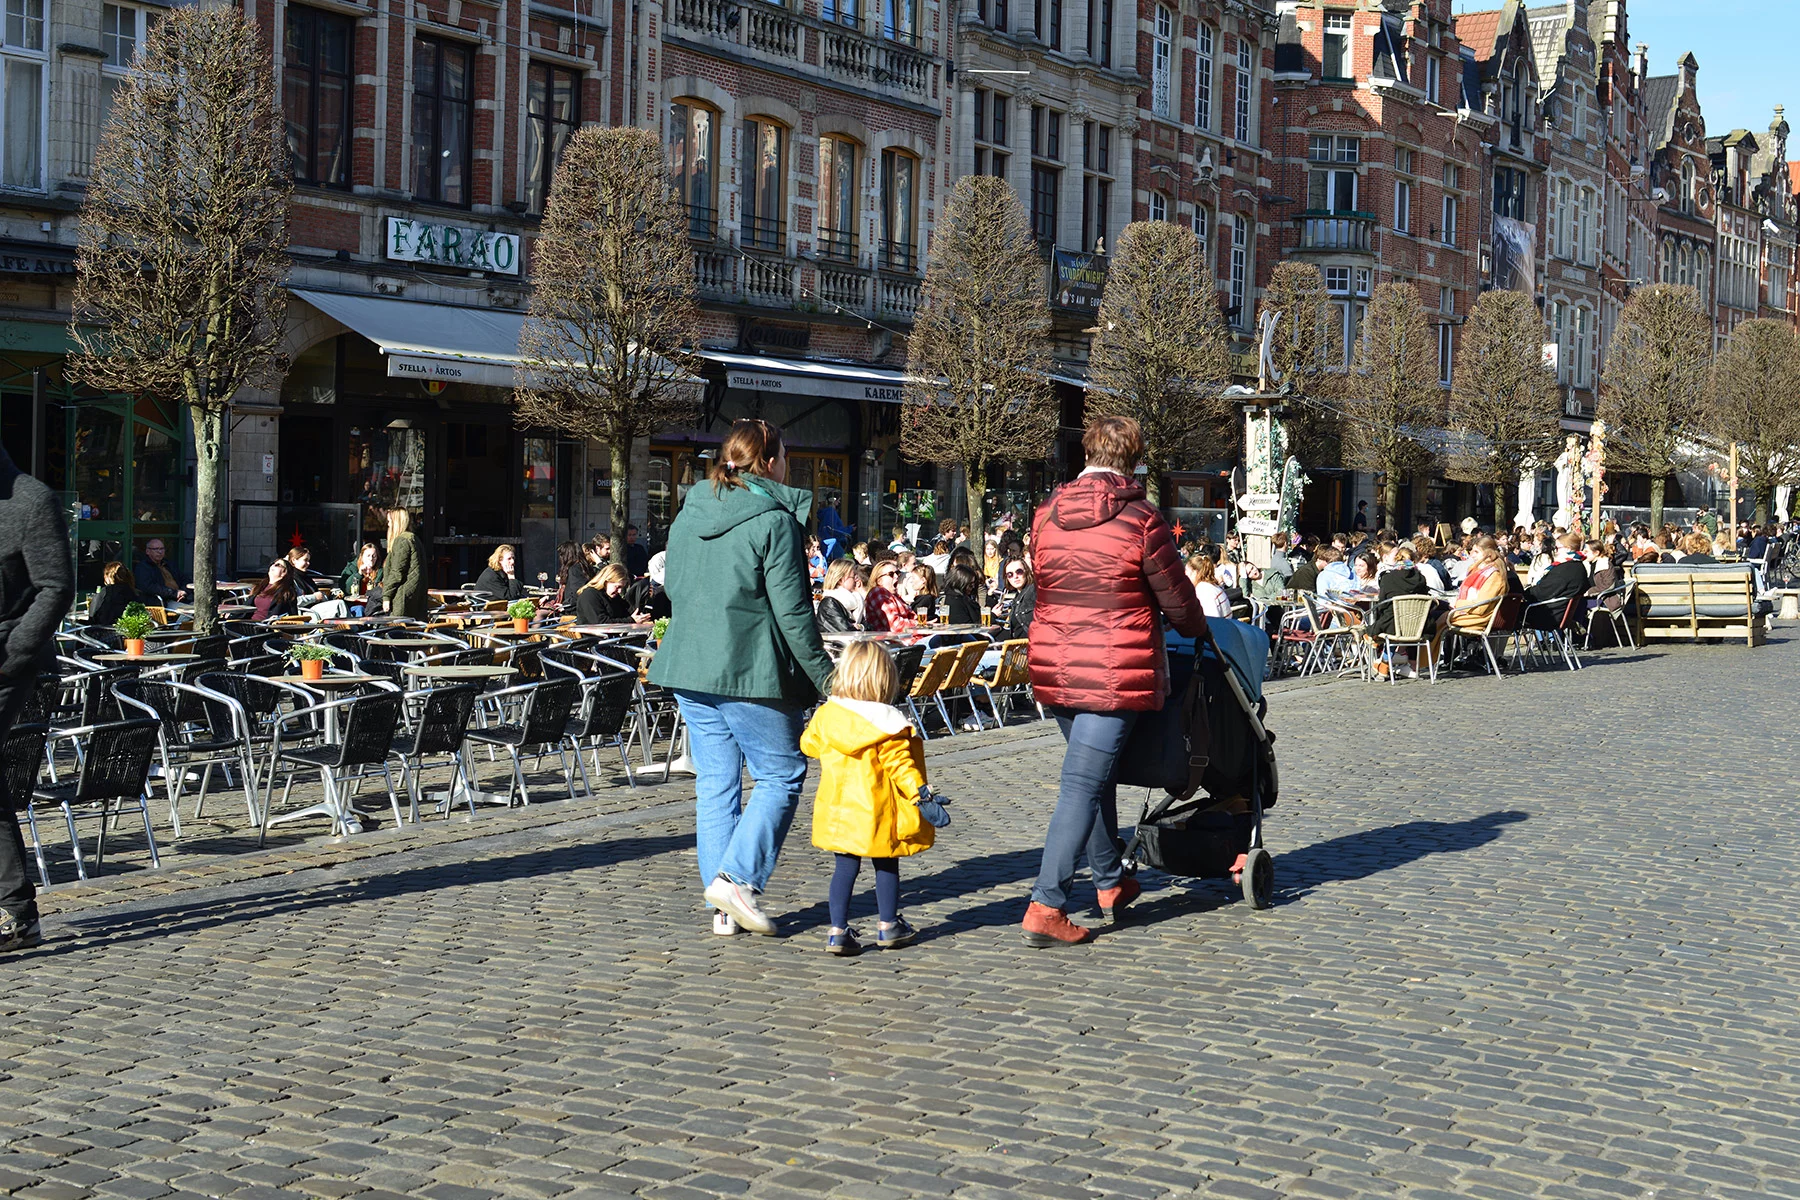 A family from behind, walking through a market square